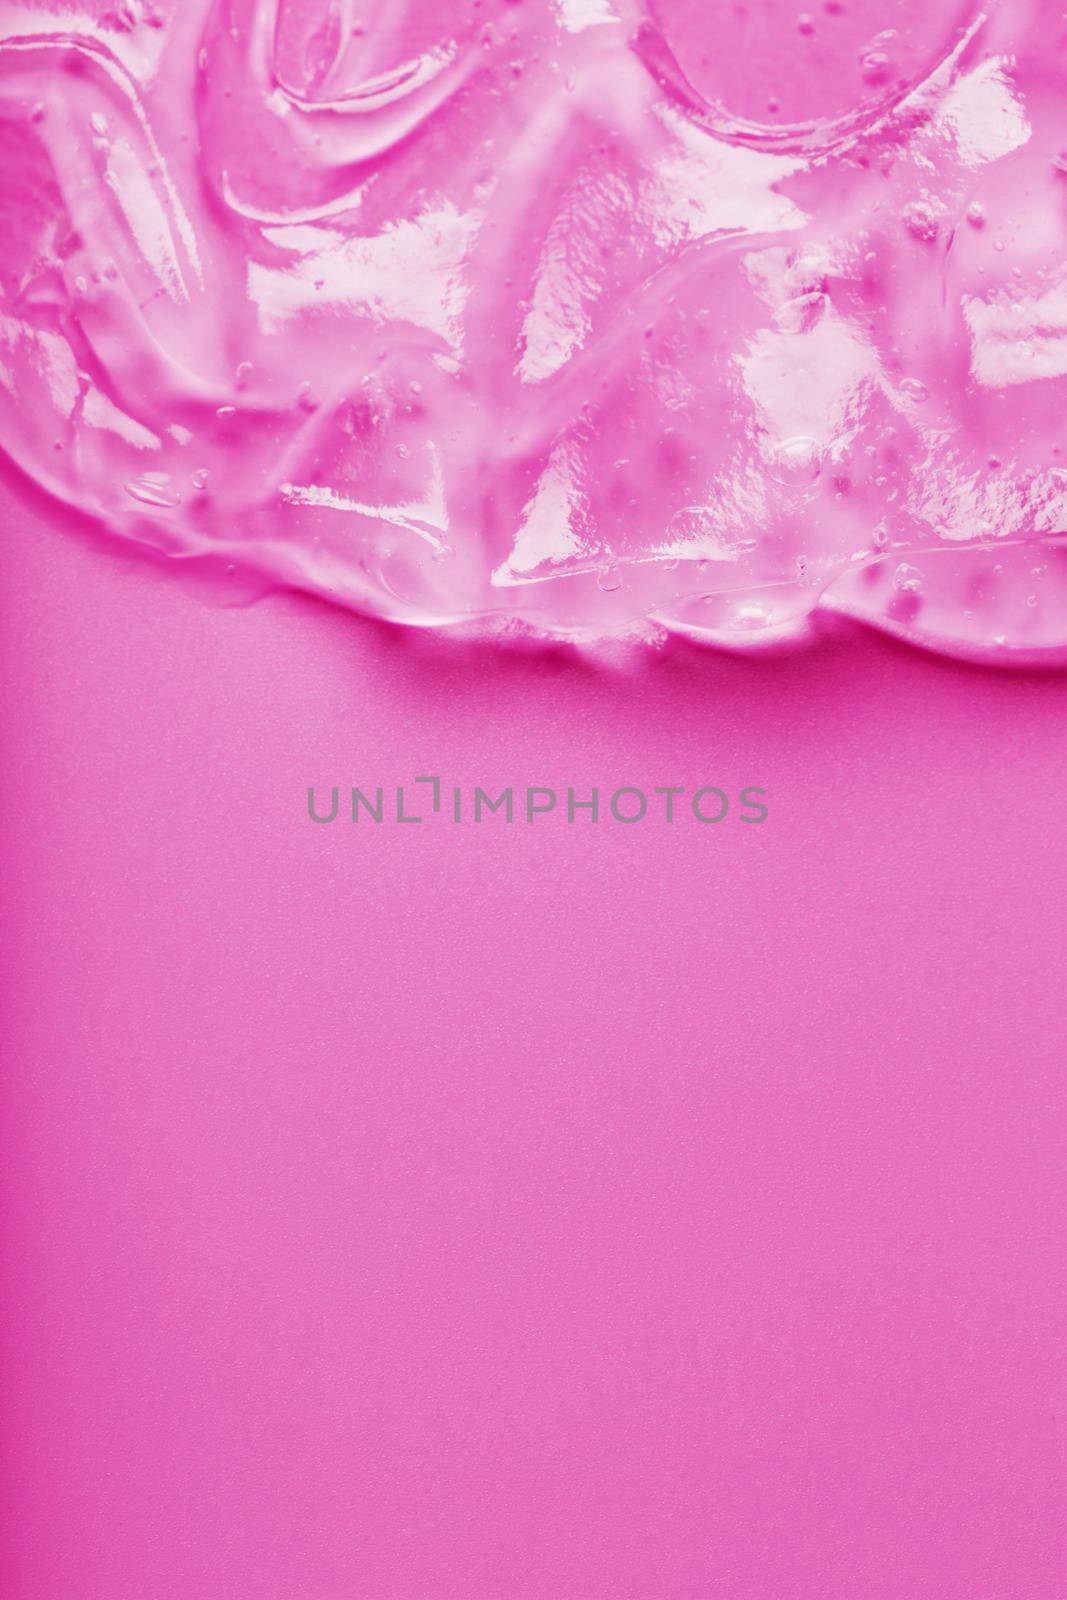 Transparent liquid gel on a pink background with free space. by AlexGrec